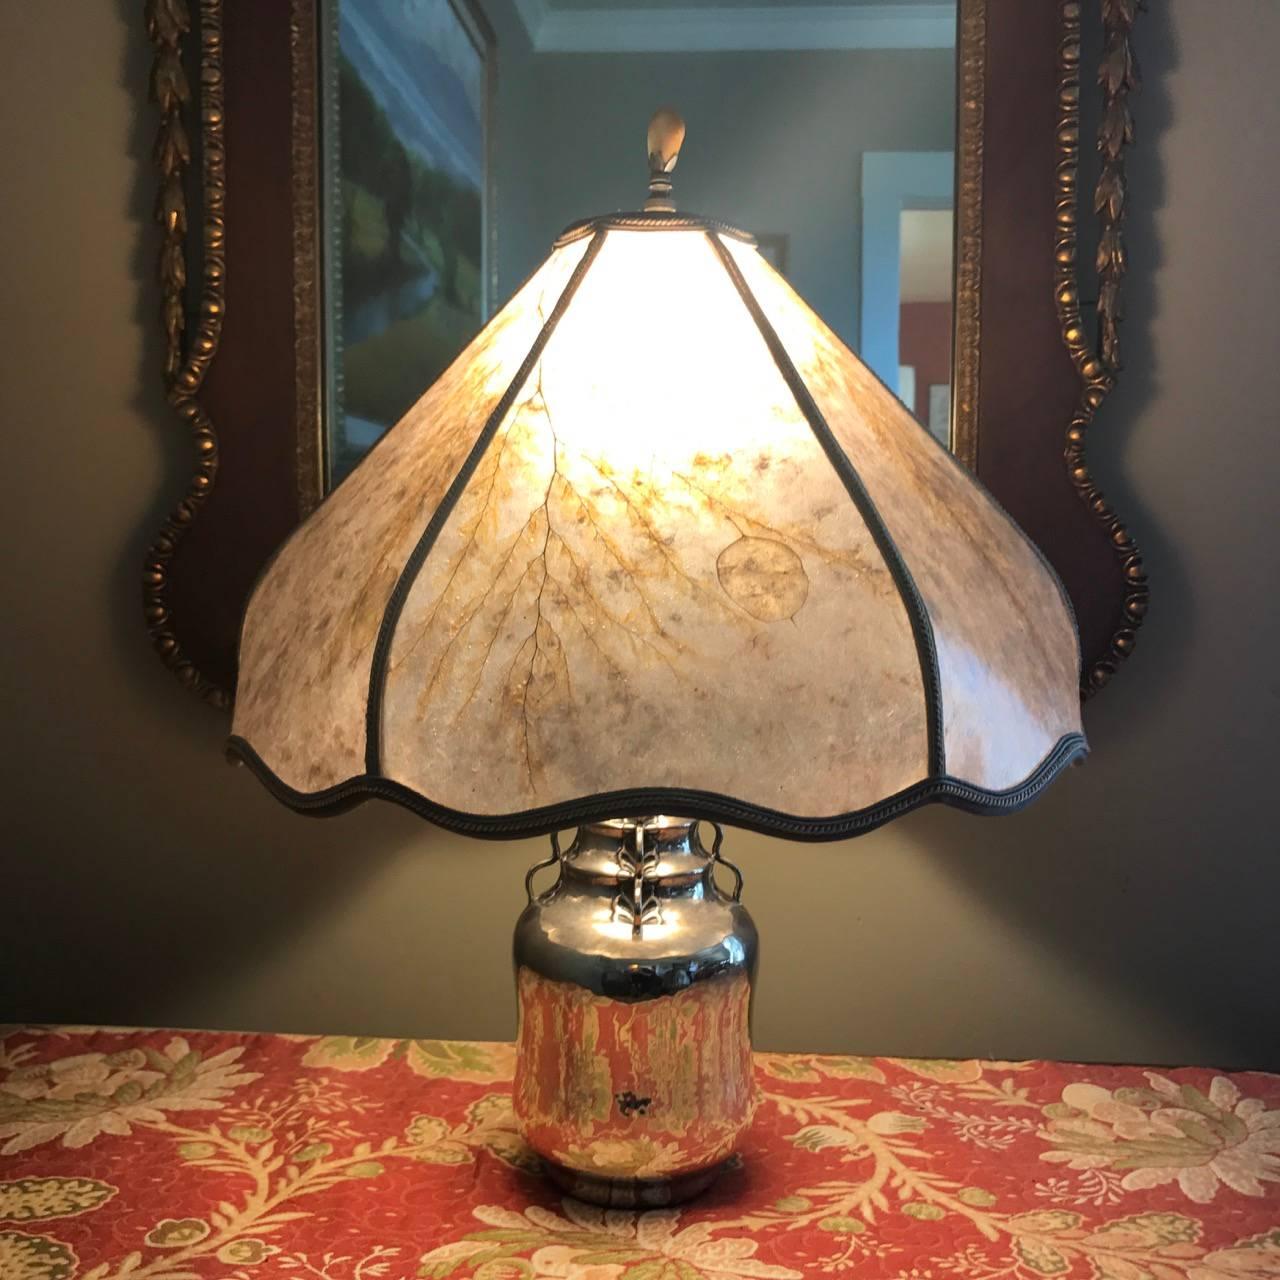 Mogens Ballin 826 silver lamp with custom shade.
This piece was a custom silver vase that was later converted to a lamp without damaging the vase. This rare piece is entirely handmade with beautiful details and hand hammering and chased leaves.